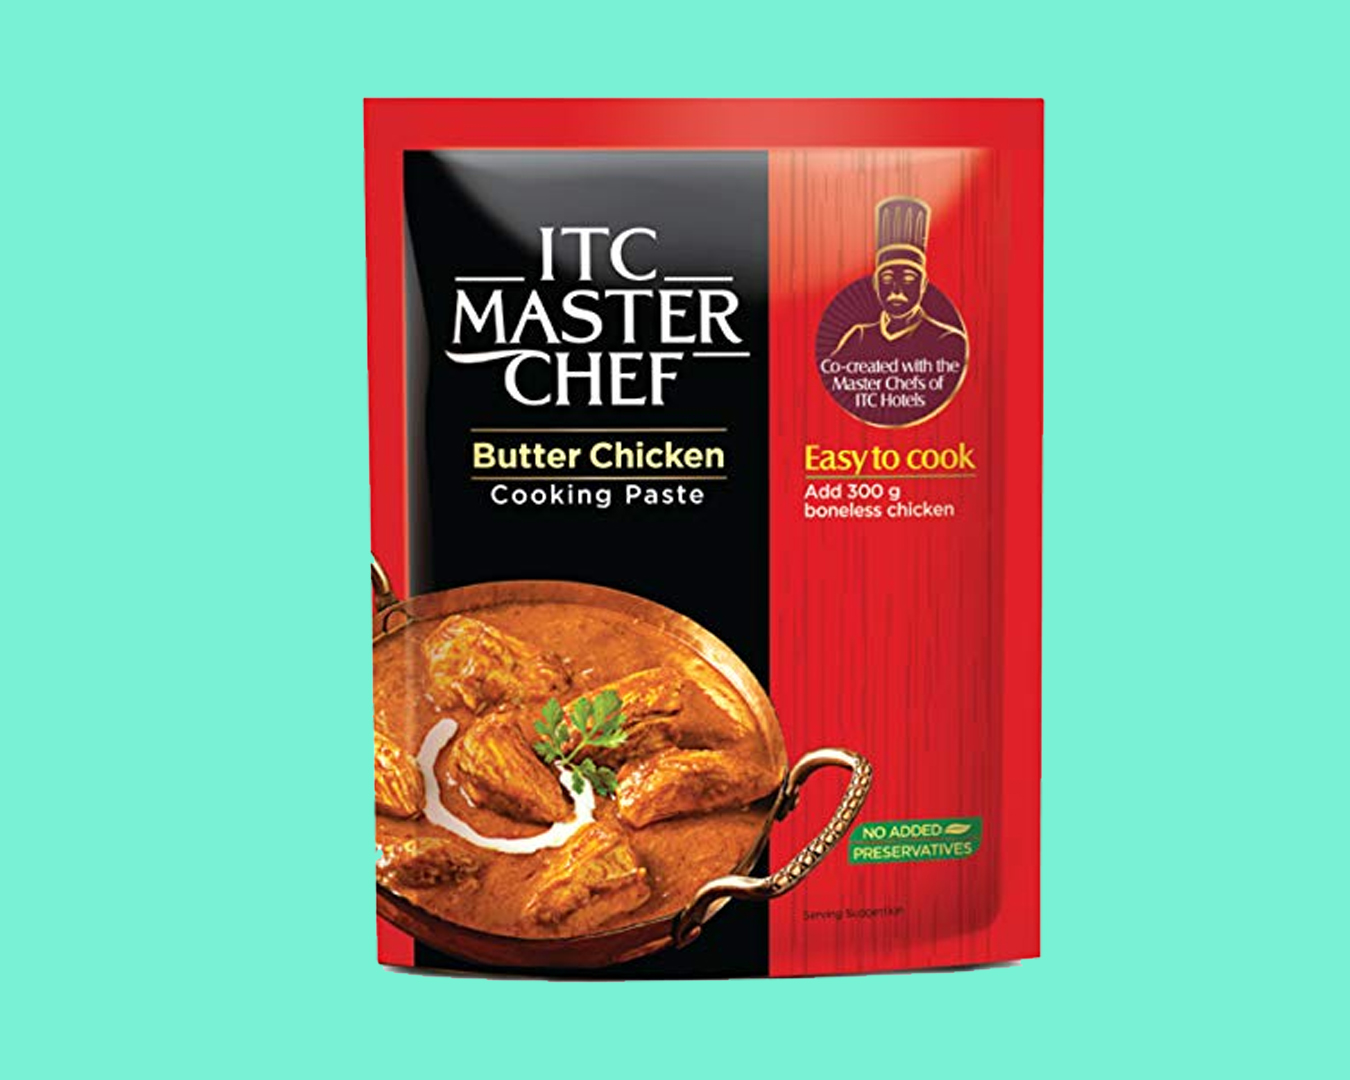 ITC-MASTER-CHEF-COOKING-PASTES